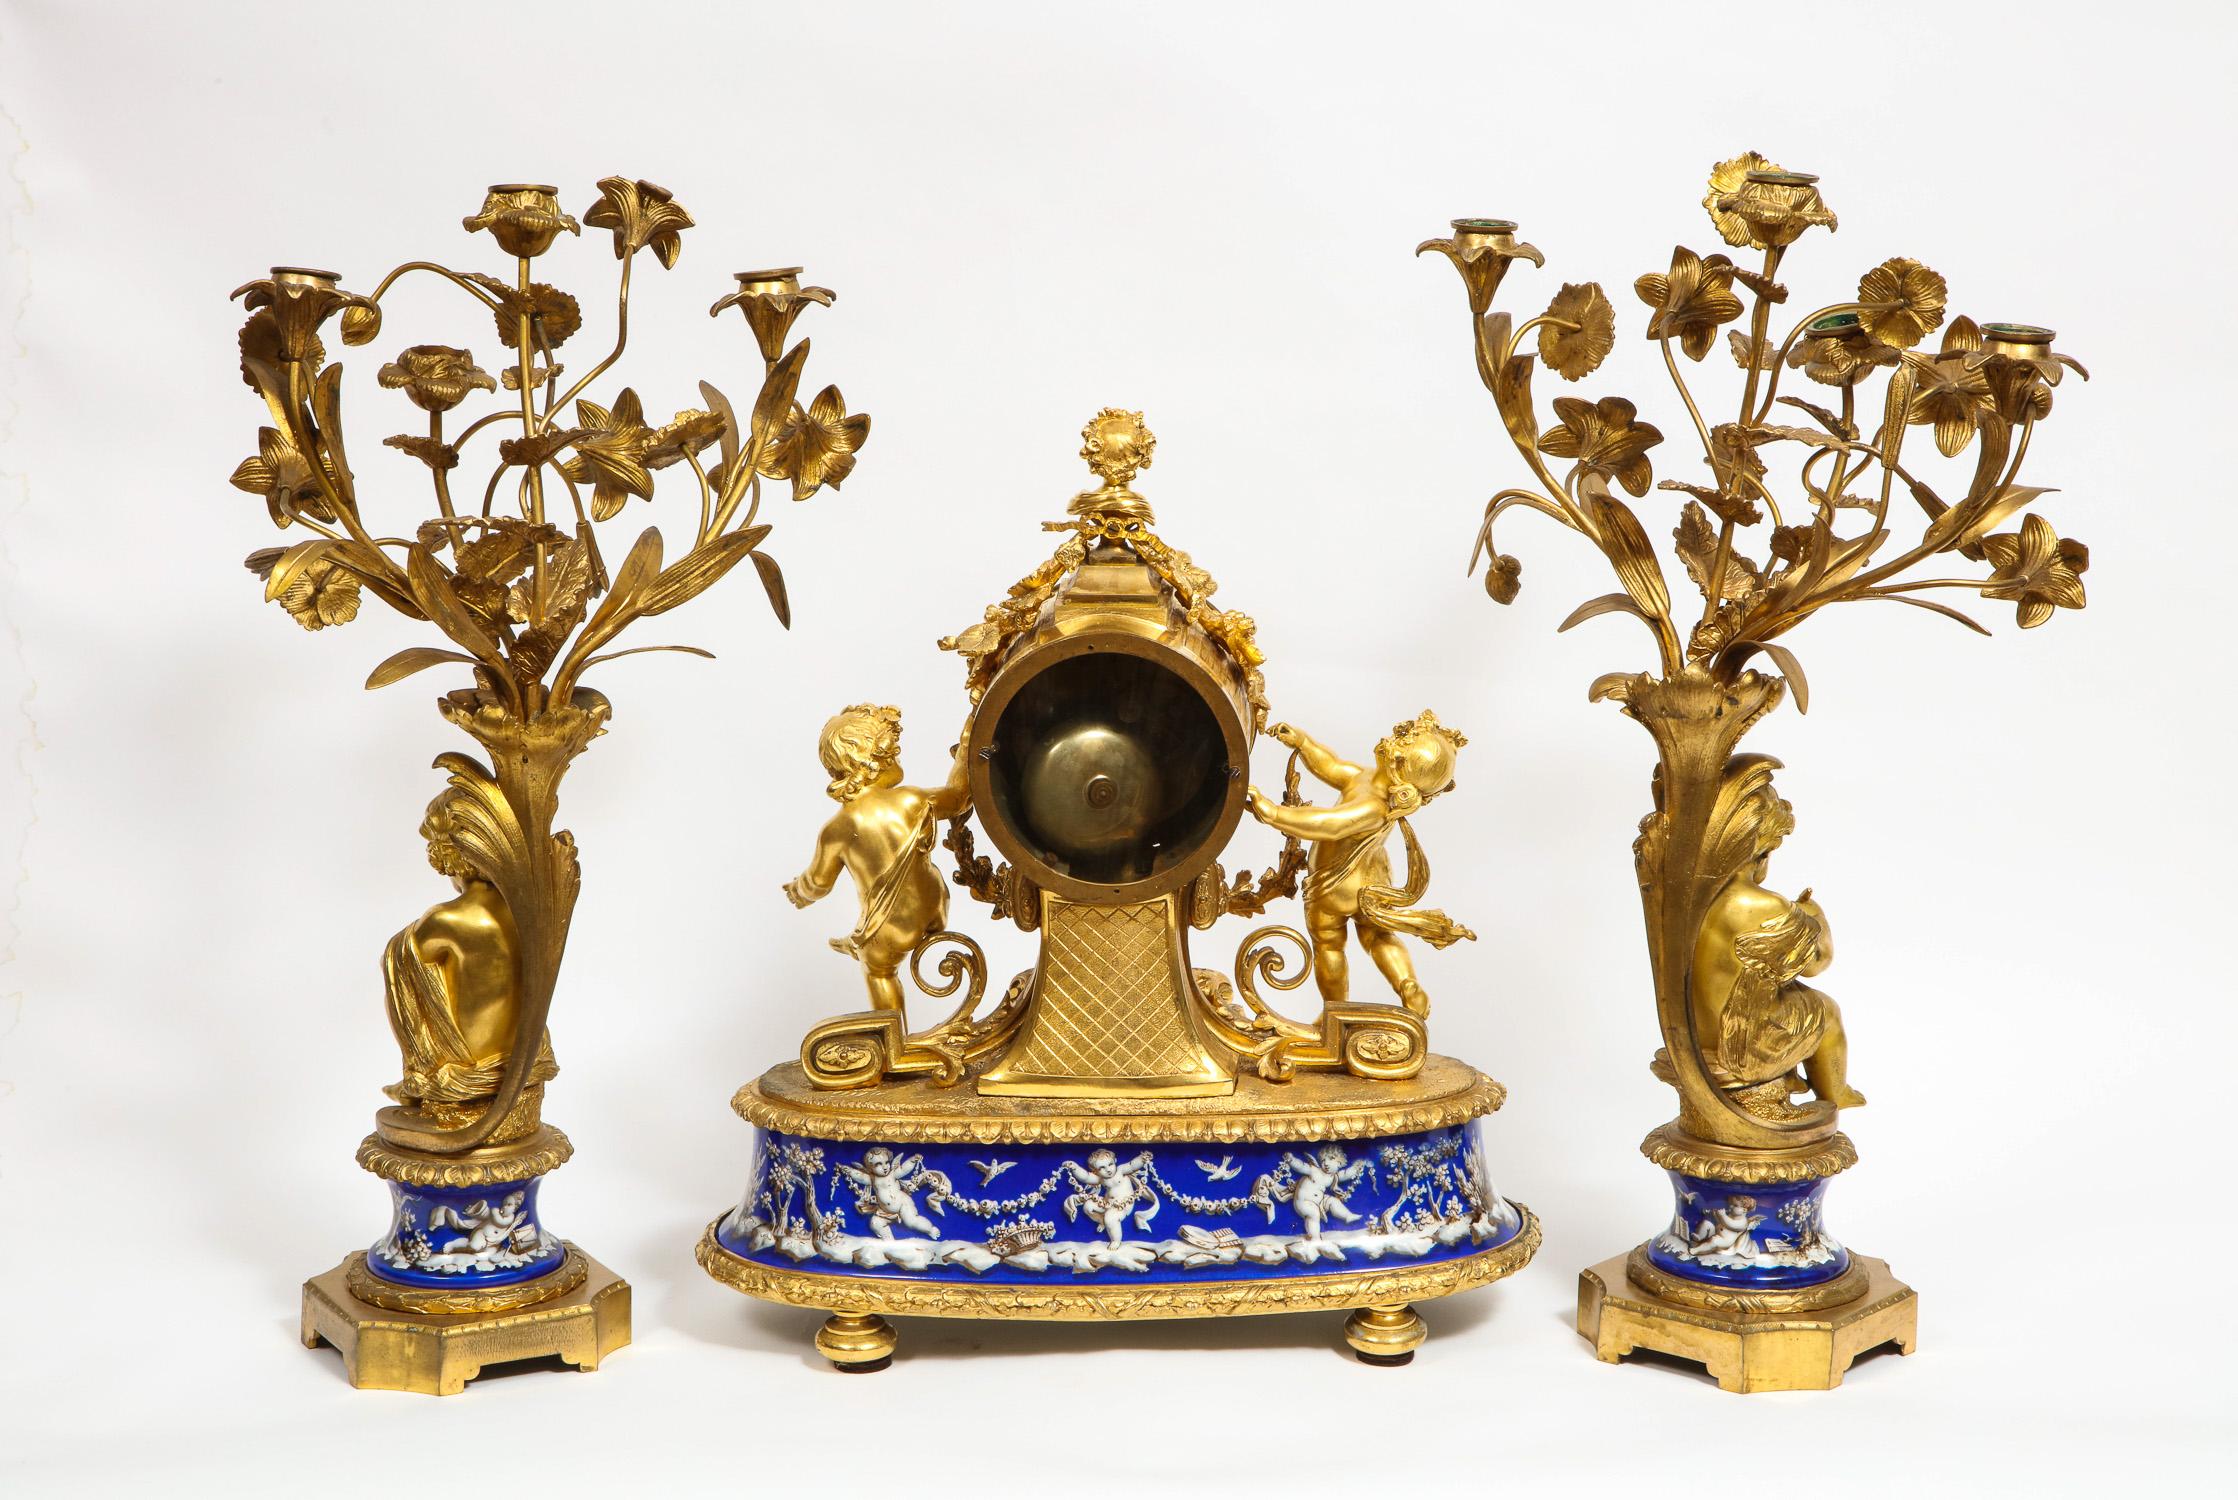 Exquisite French Ormolu Bronze and Blue Porcelain Mounted Three-Piece Clock Set 9